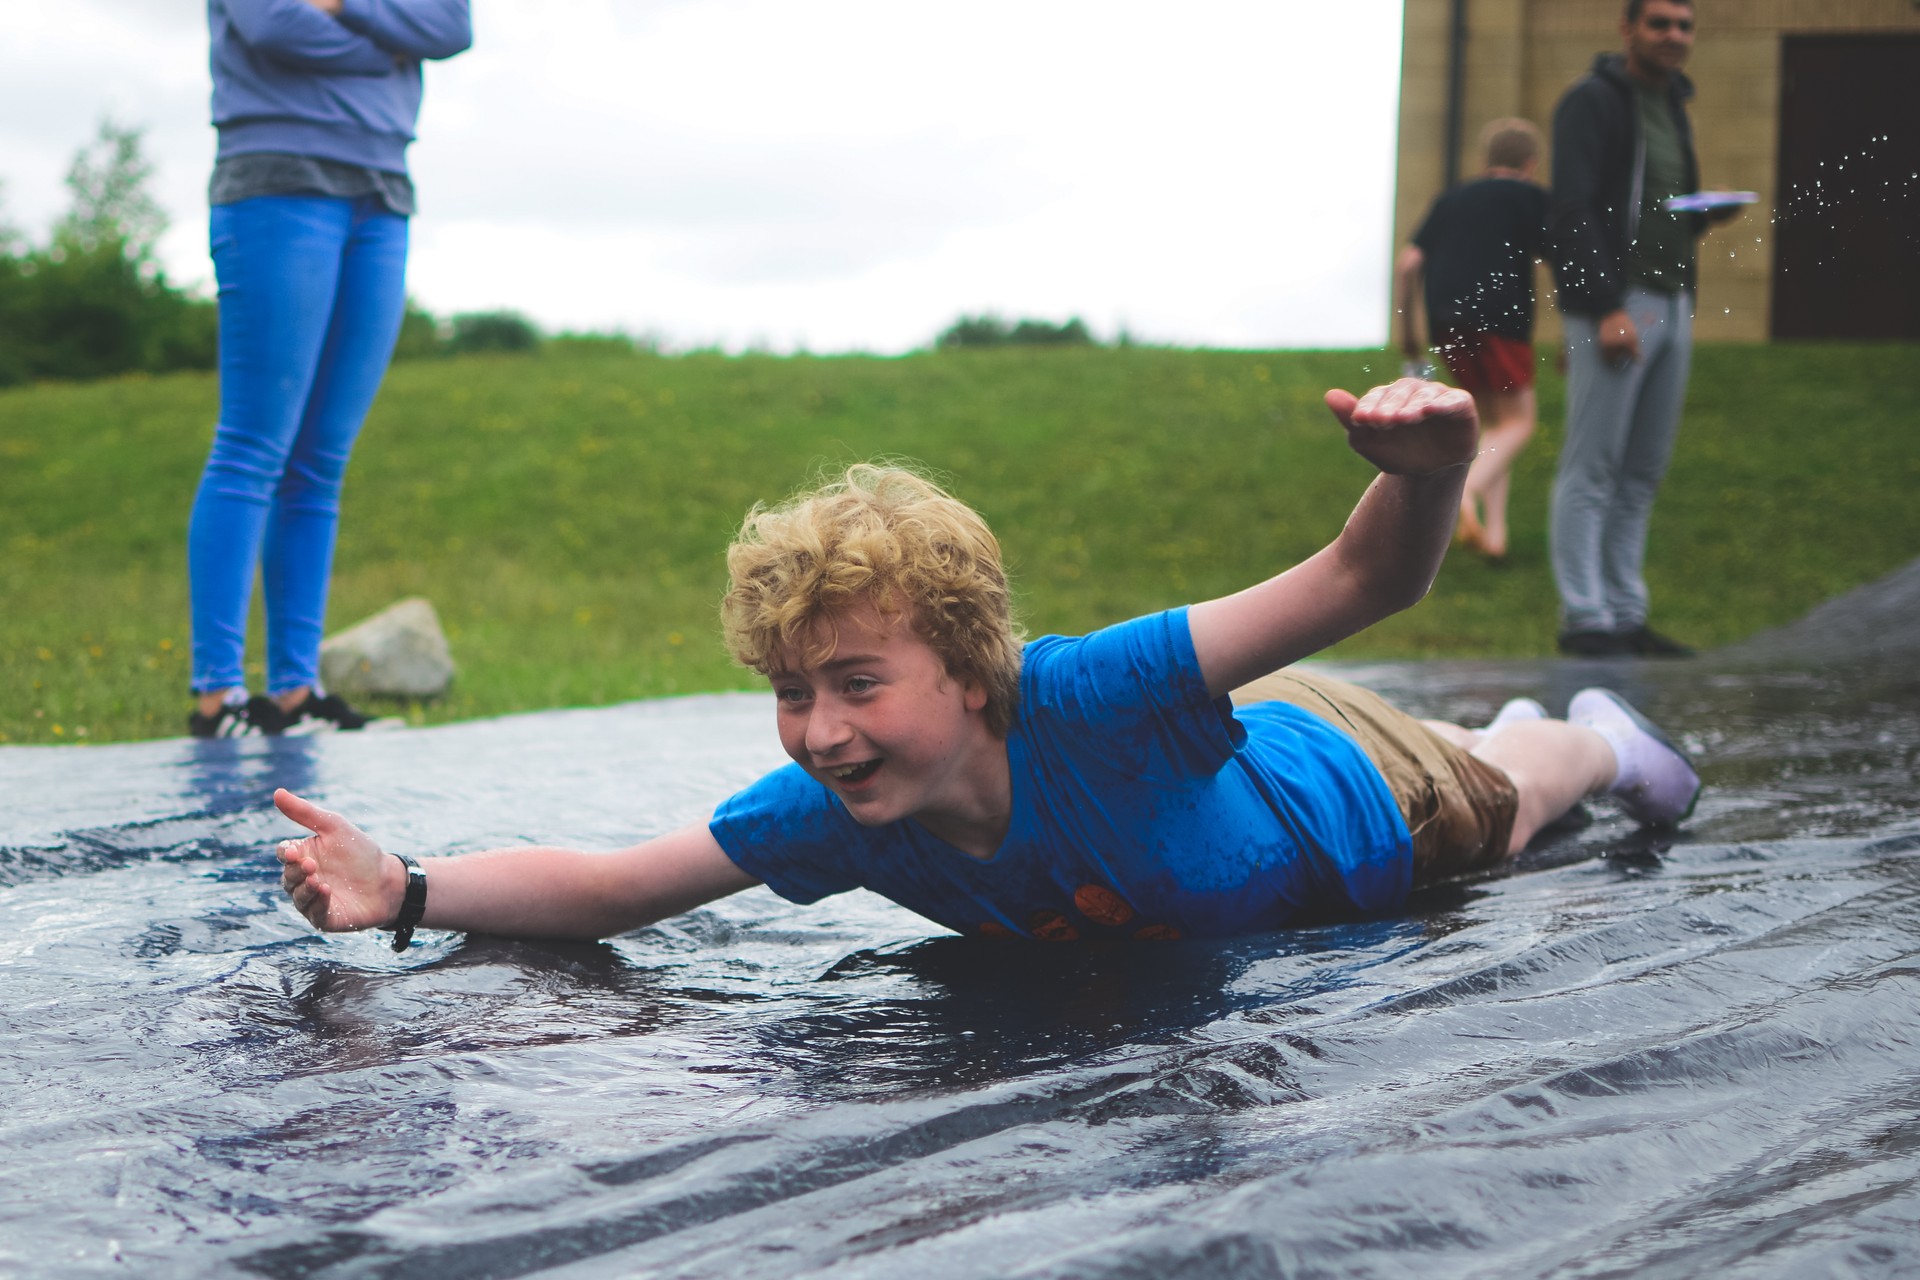 A camper enjoying the water games, sliding down a hill.